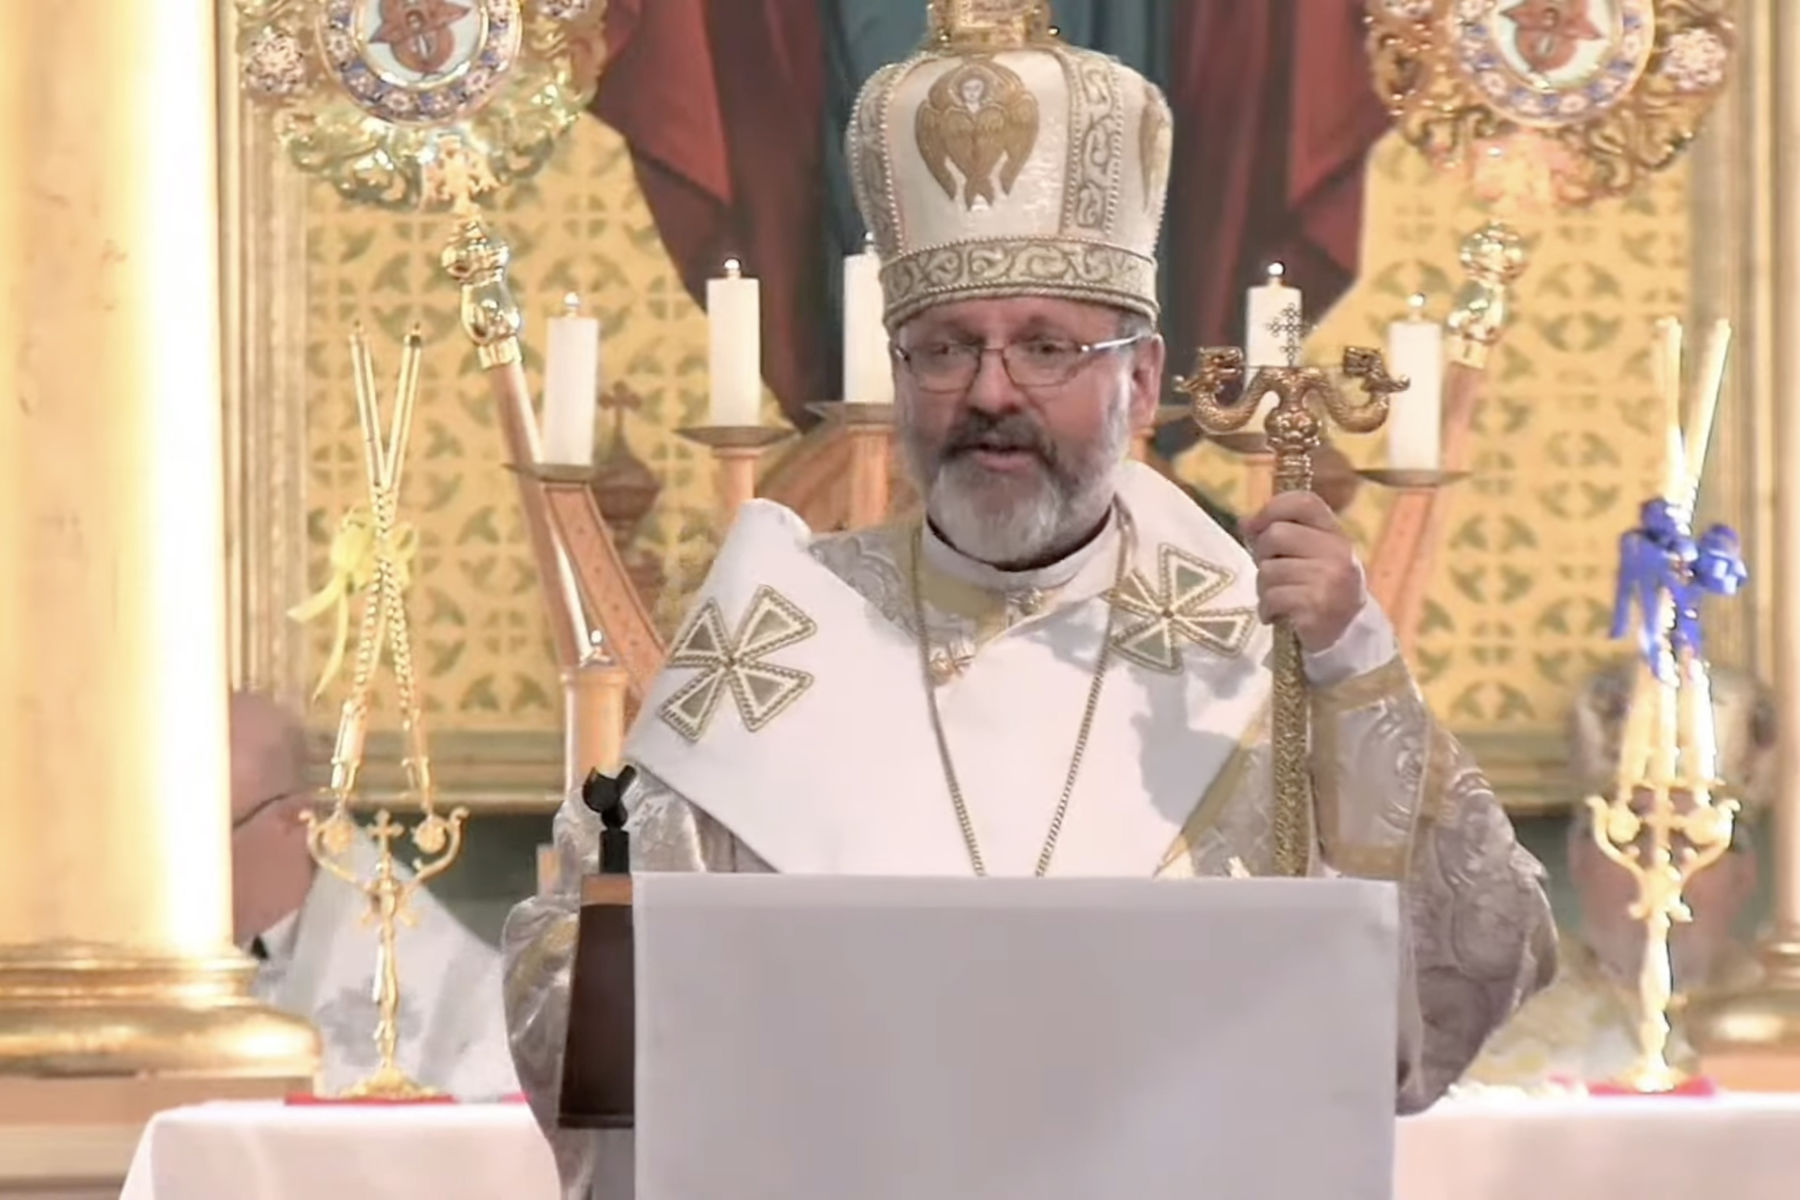 Homily of His Beatitude Sviatoslav at the Episcopal Installation of Reverend Father Michael Smolinski, C. S.s. R.